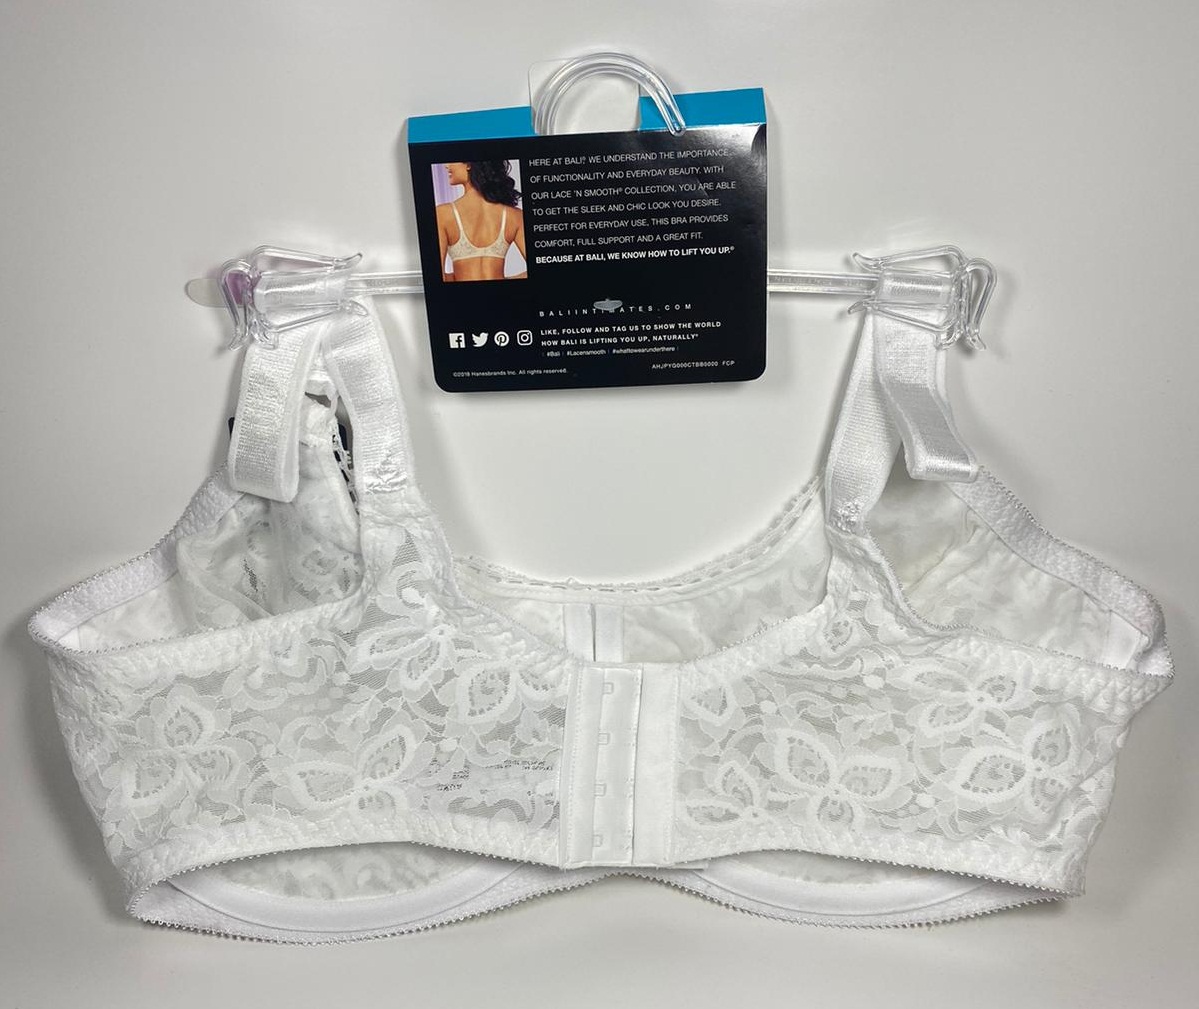 Bali Lace 'N Smooth Seamless Cup Underwire Bra 3432, 40D | eBay